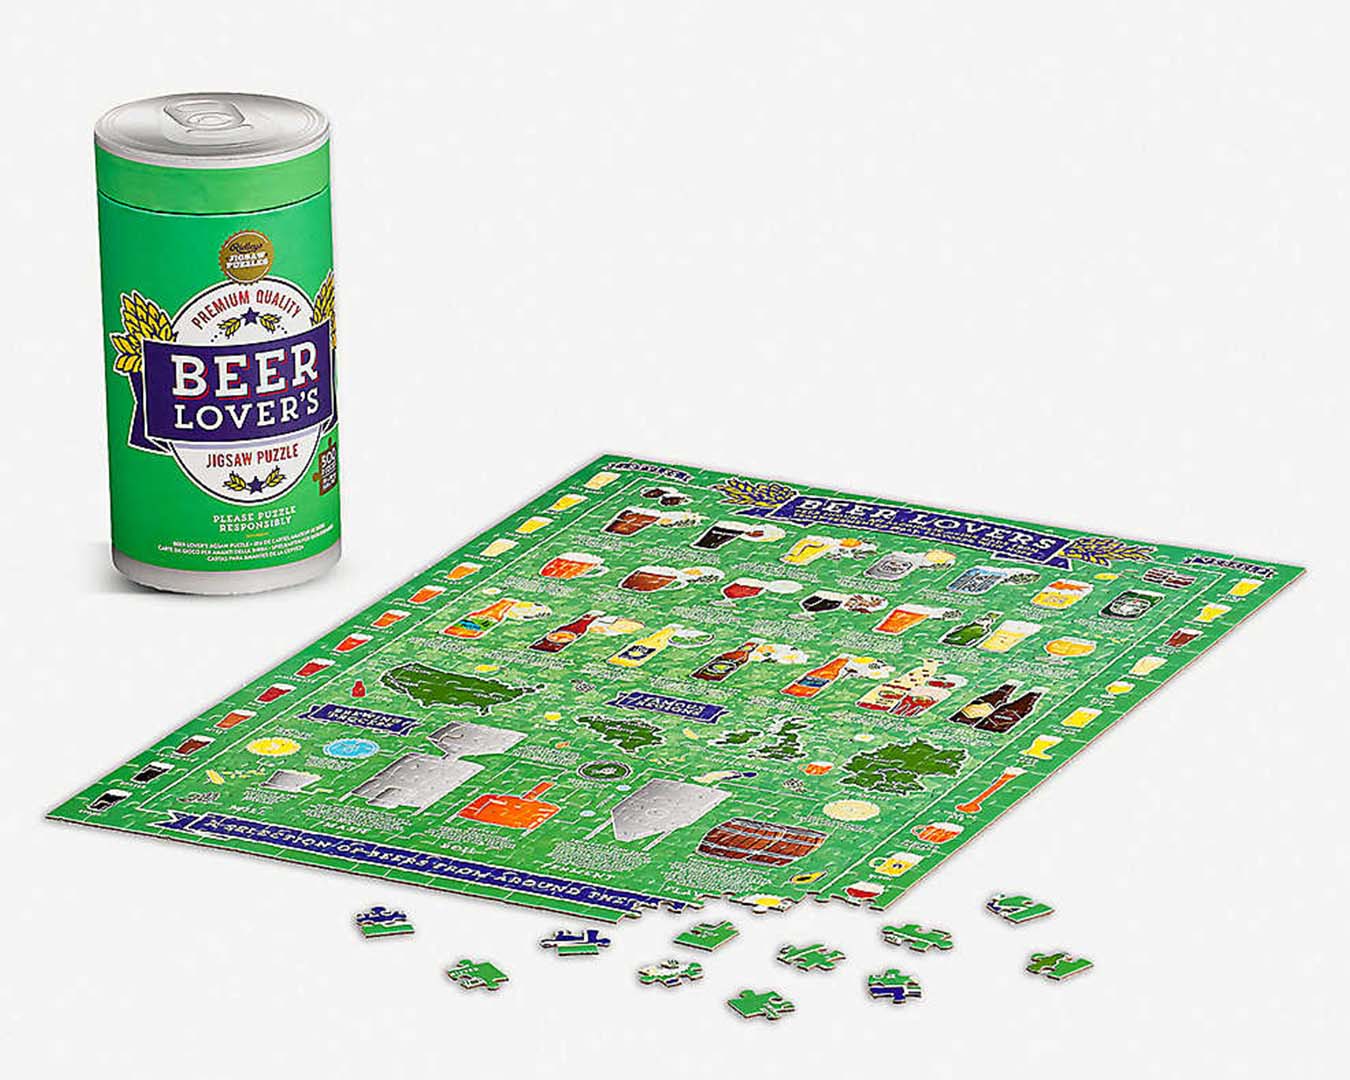 Green, partially made puzzle featuring pictures of beer, sits on a white table. In the background is a puzzle box in the shape of a beer tin.